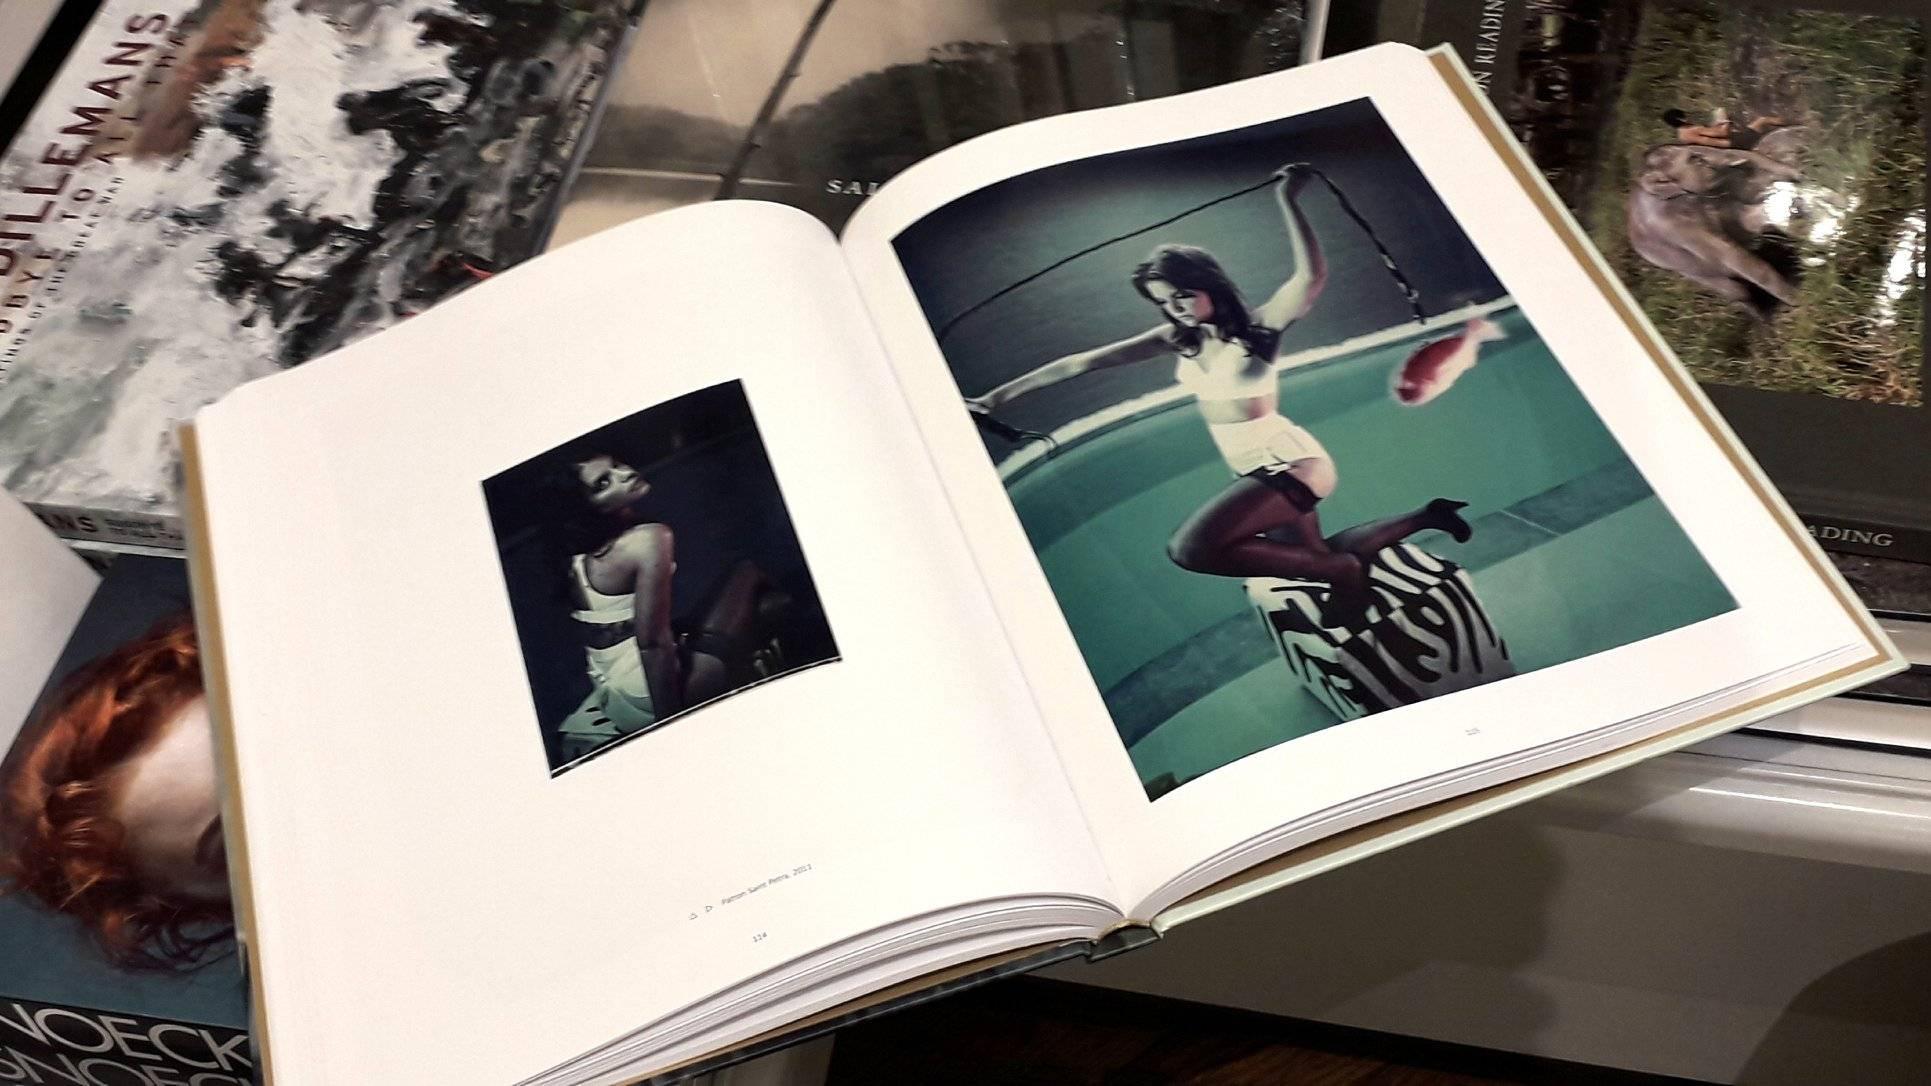 'The Eyes of the Fox' book signed including 'Kati Heck', Edition of 3 - Black Nude Photograph by Carmen de Vos